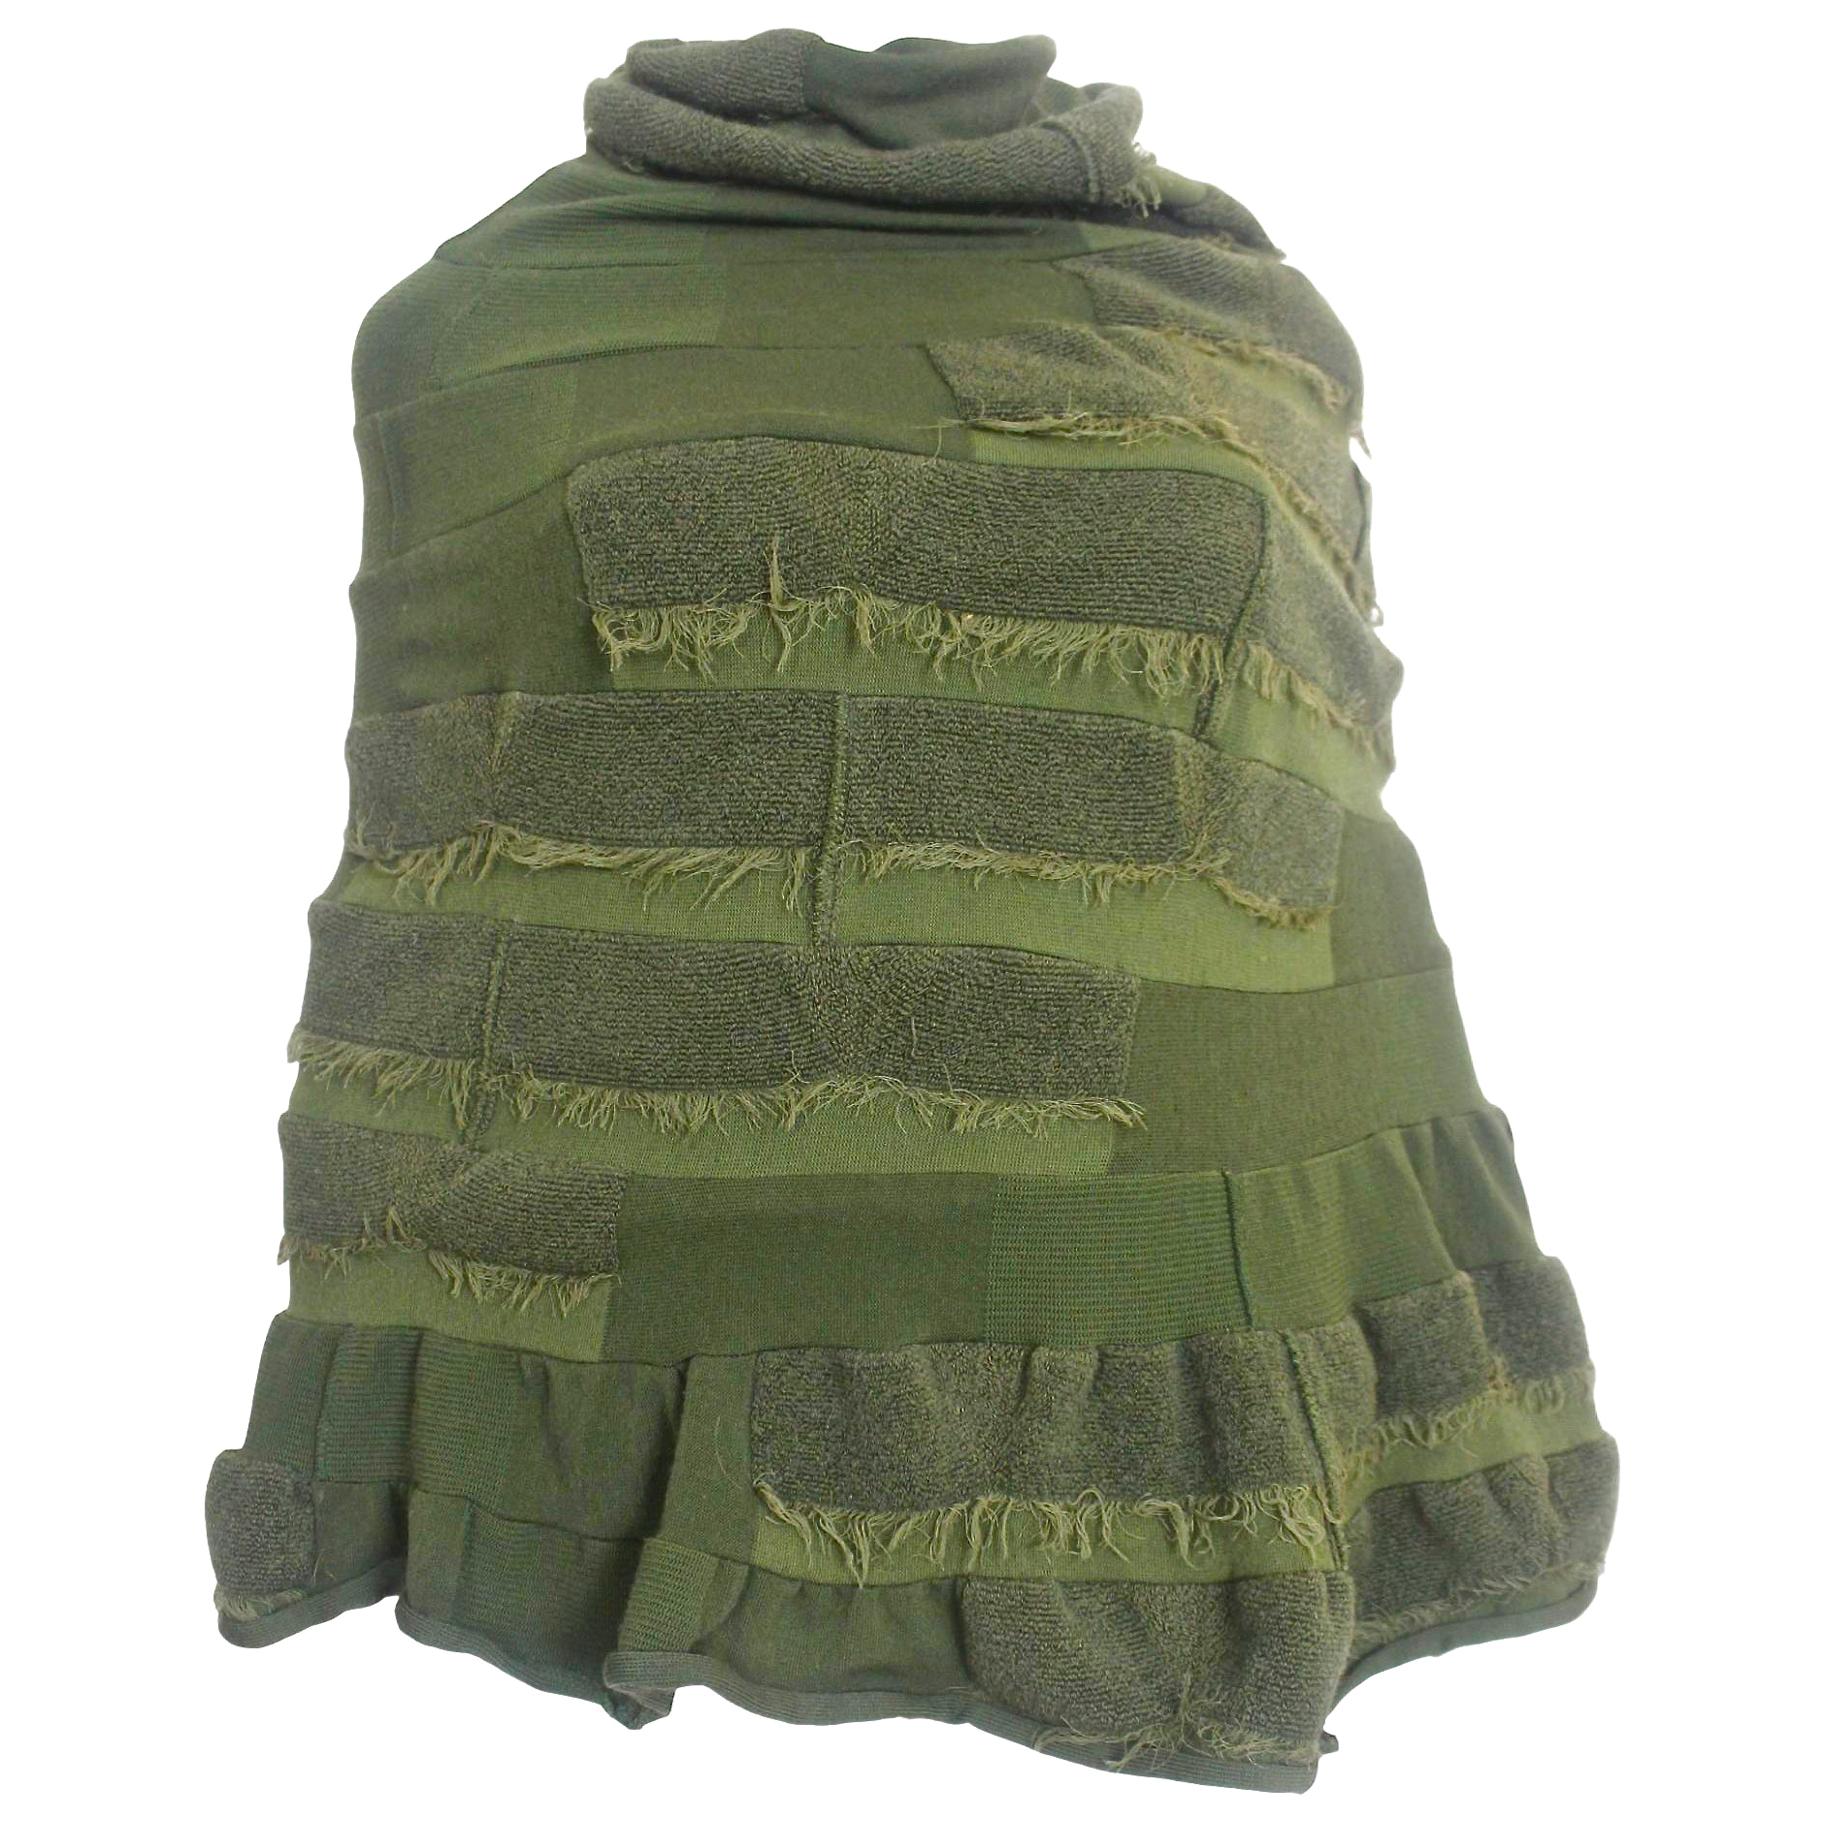 Comme des Garçons Junya Watanabe 2006 Collection Military Knitted Poncho